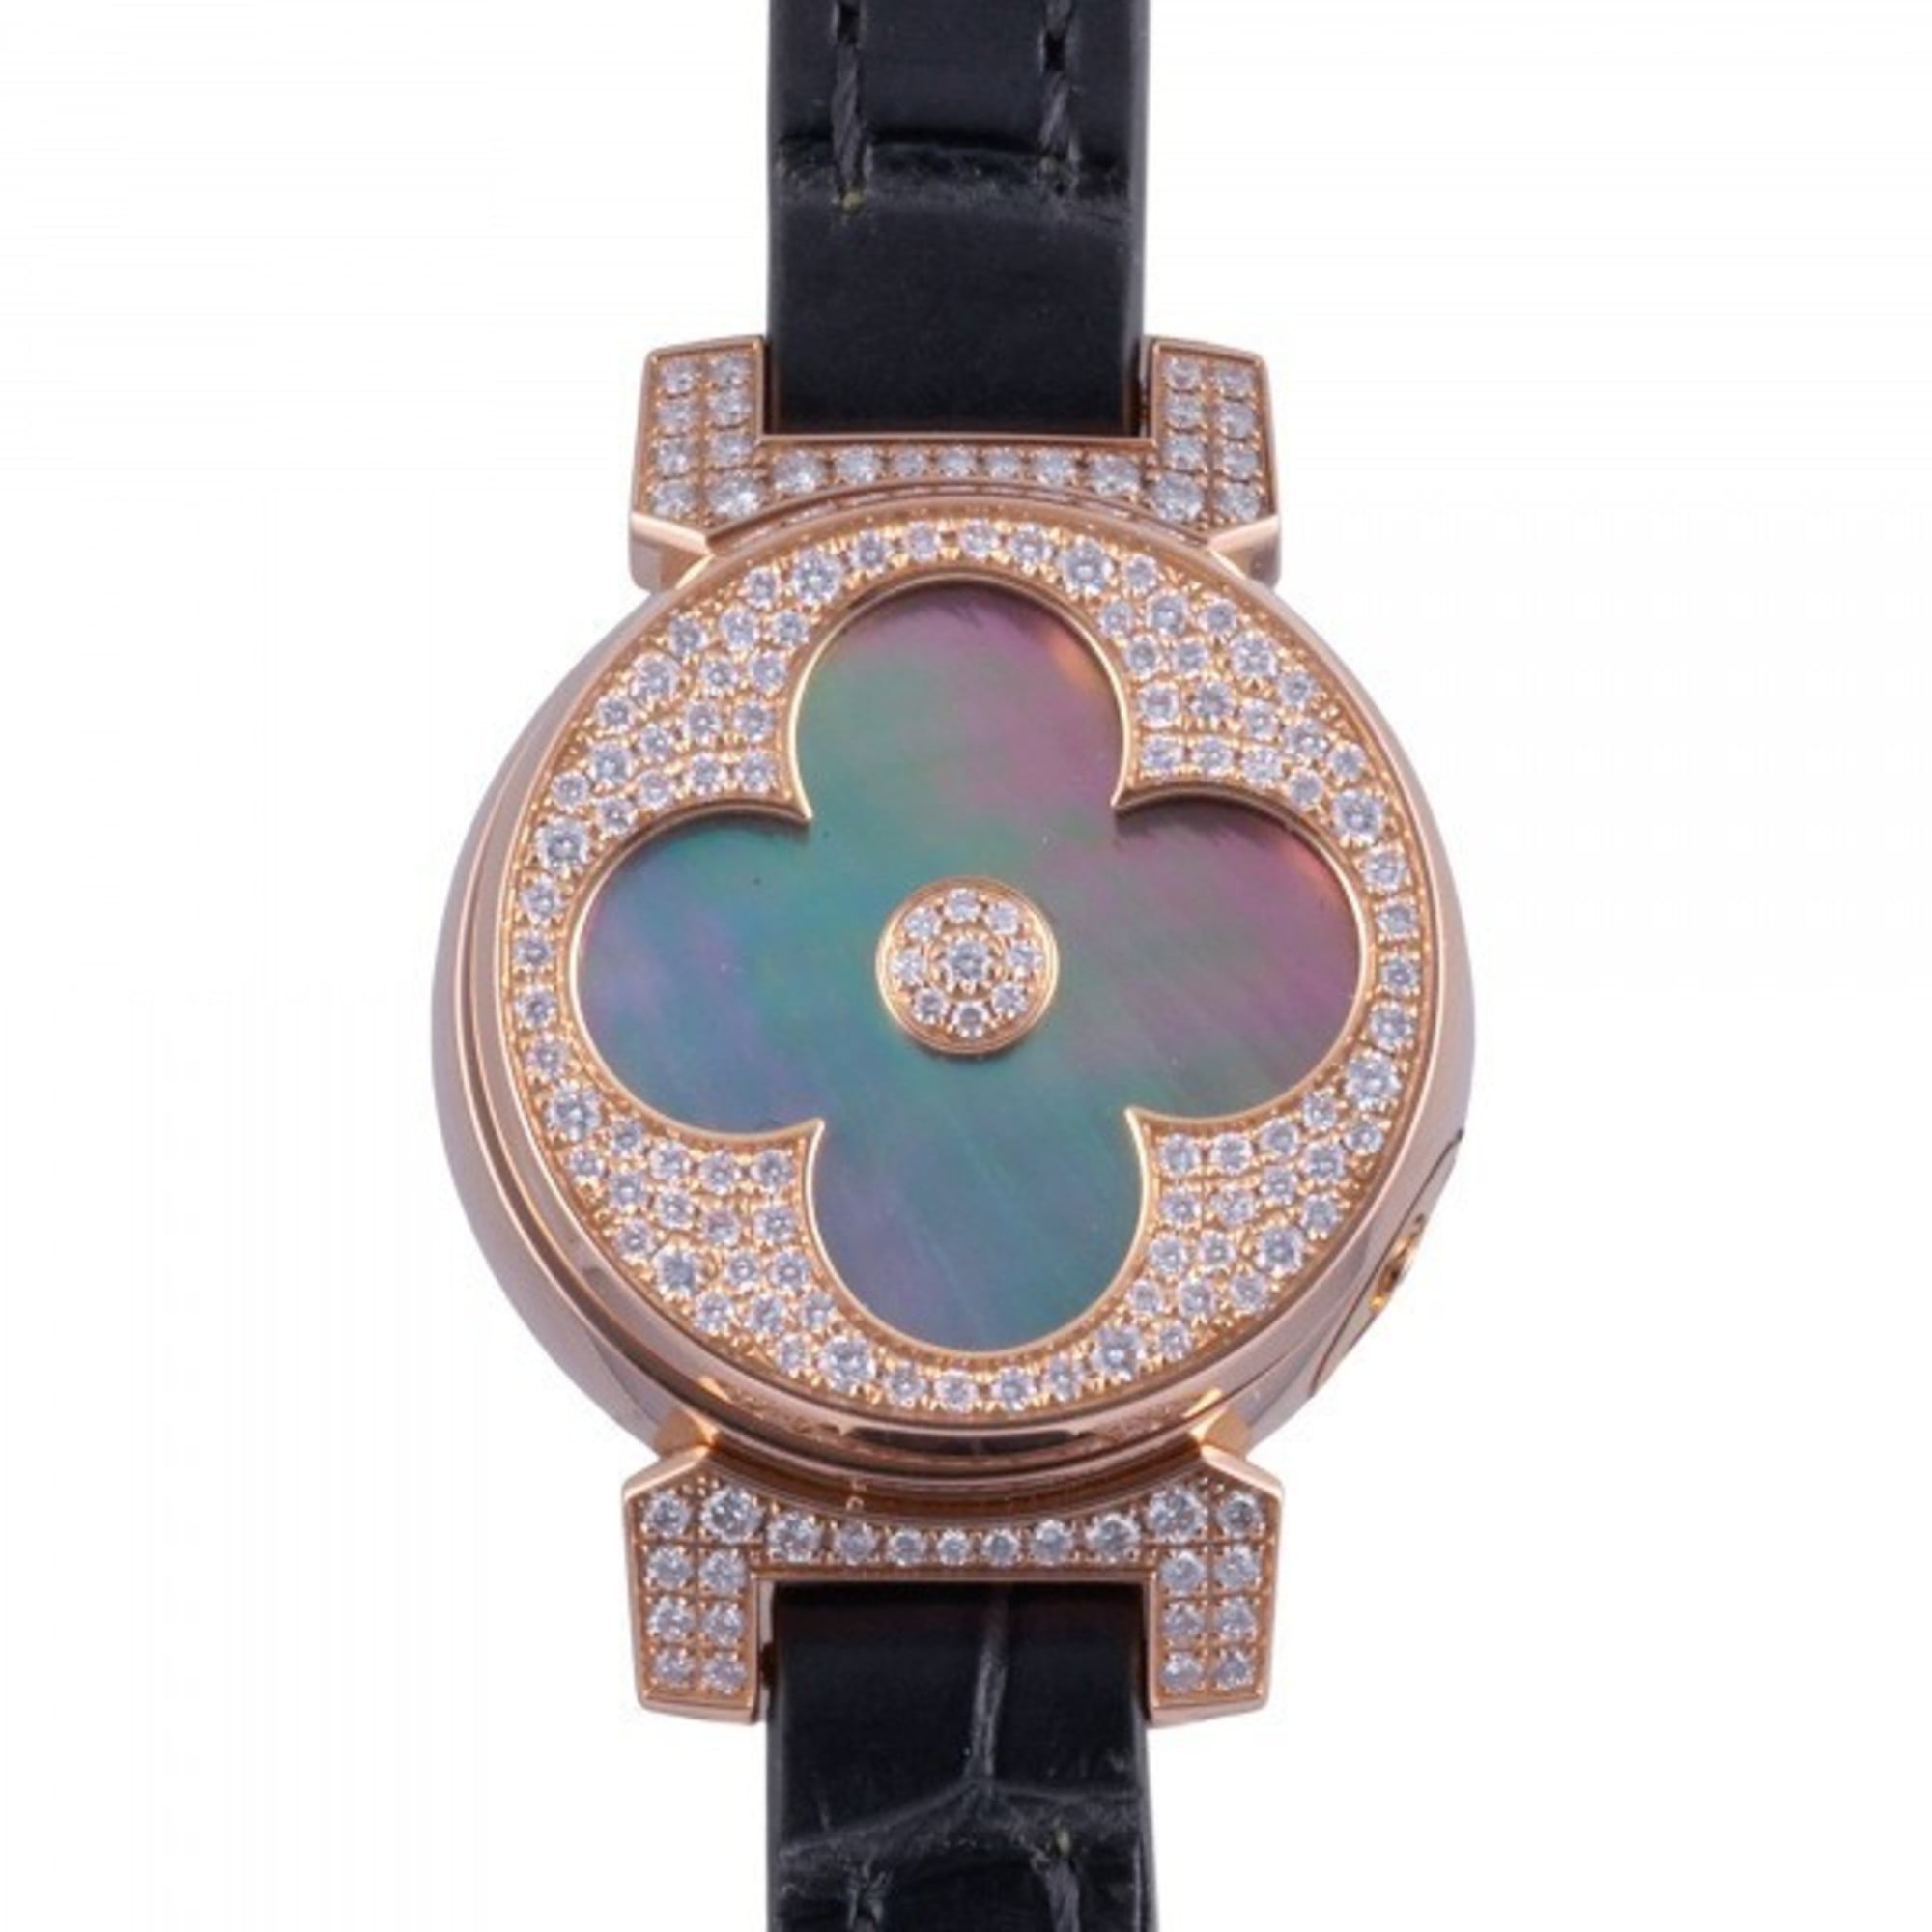 Pre-owned Louis Vuitton Tambour Watch In Black